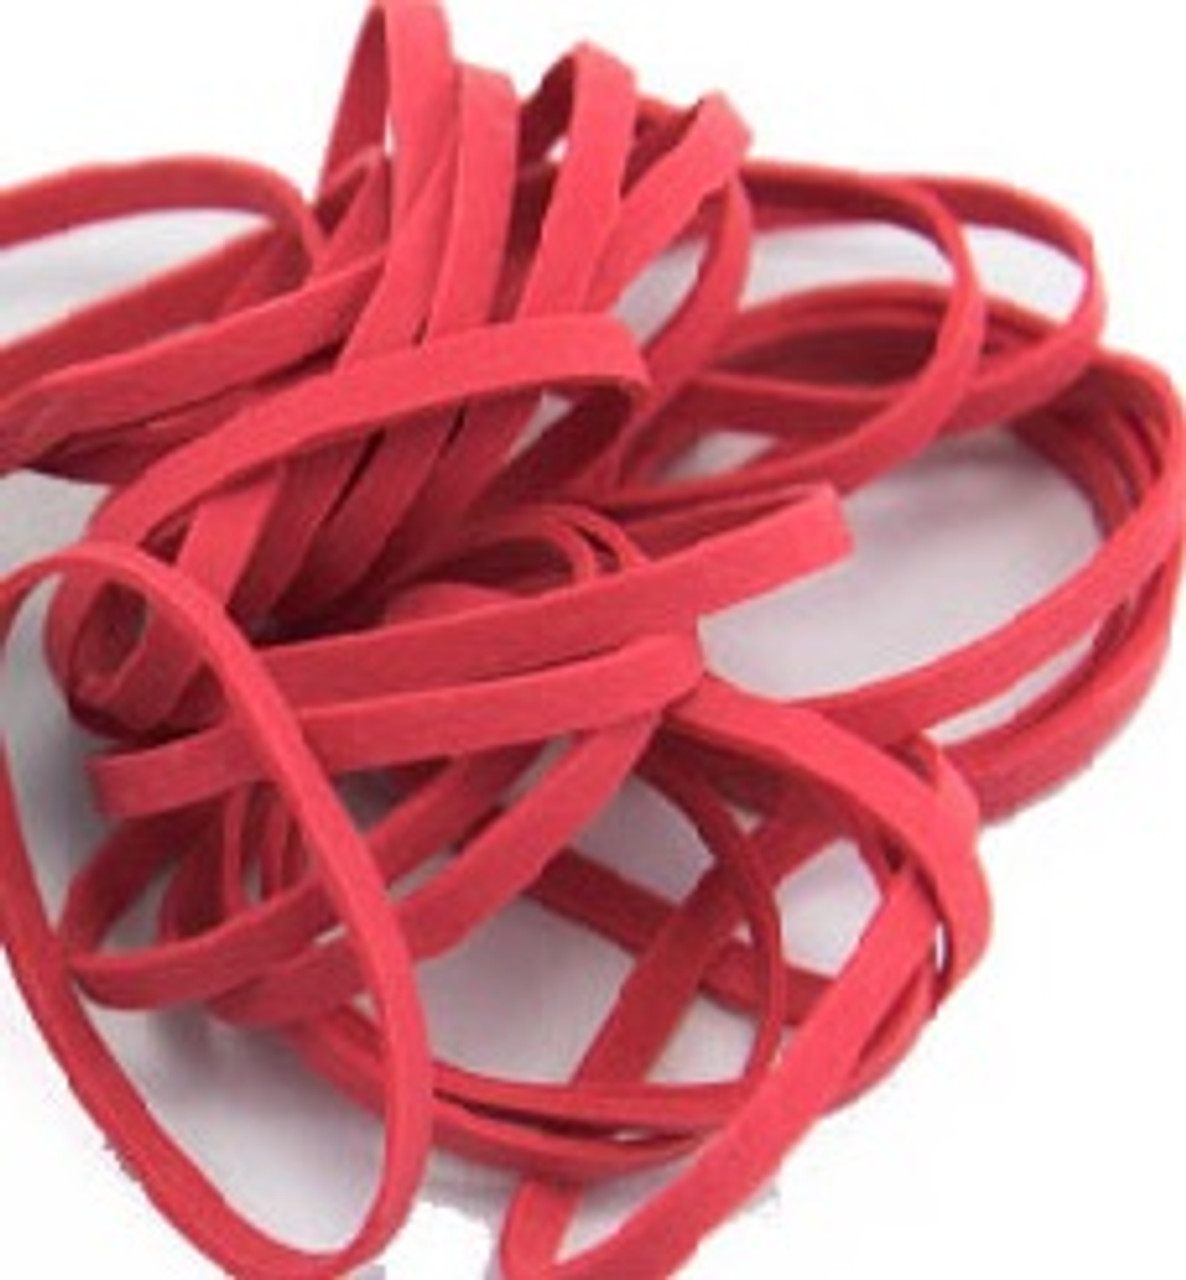 thick red rubber bands